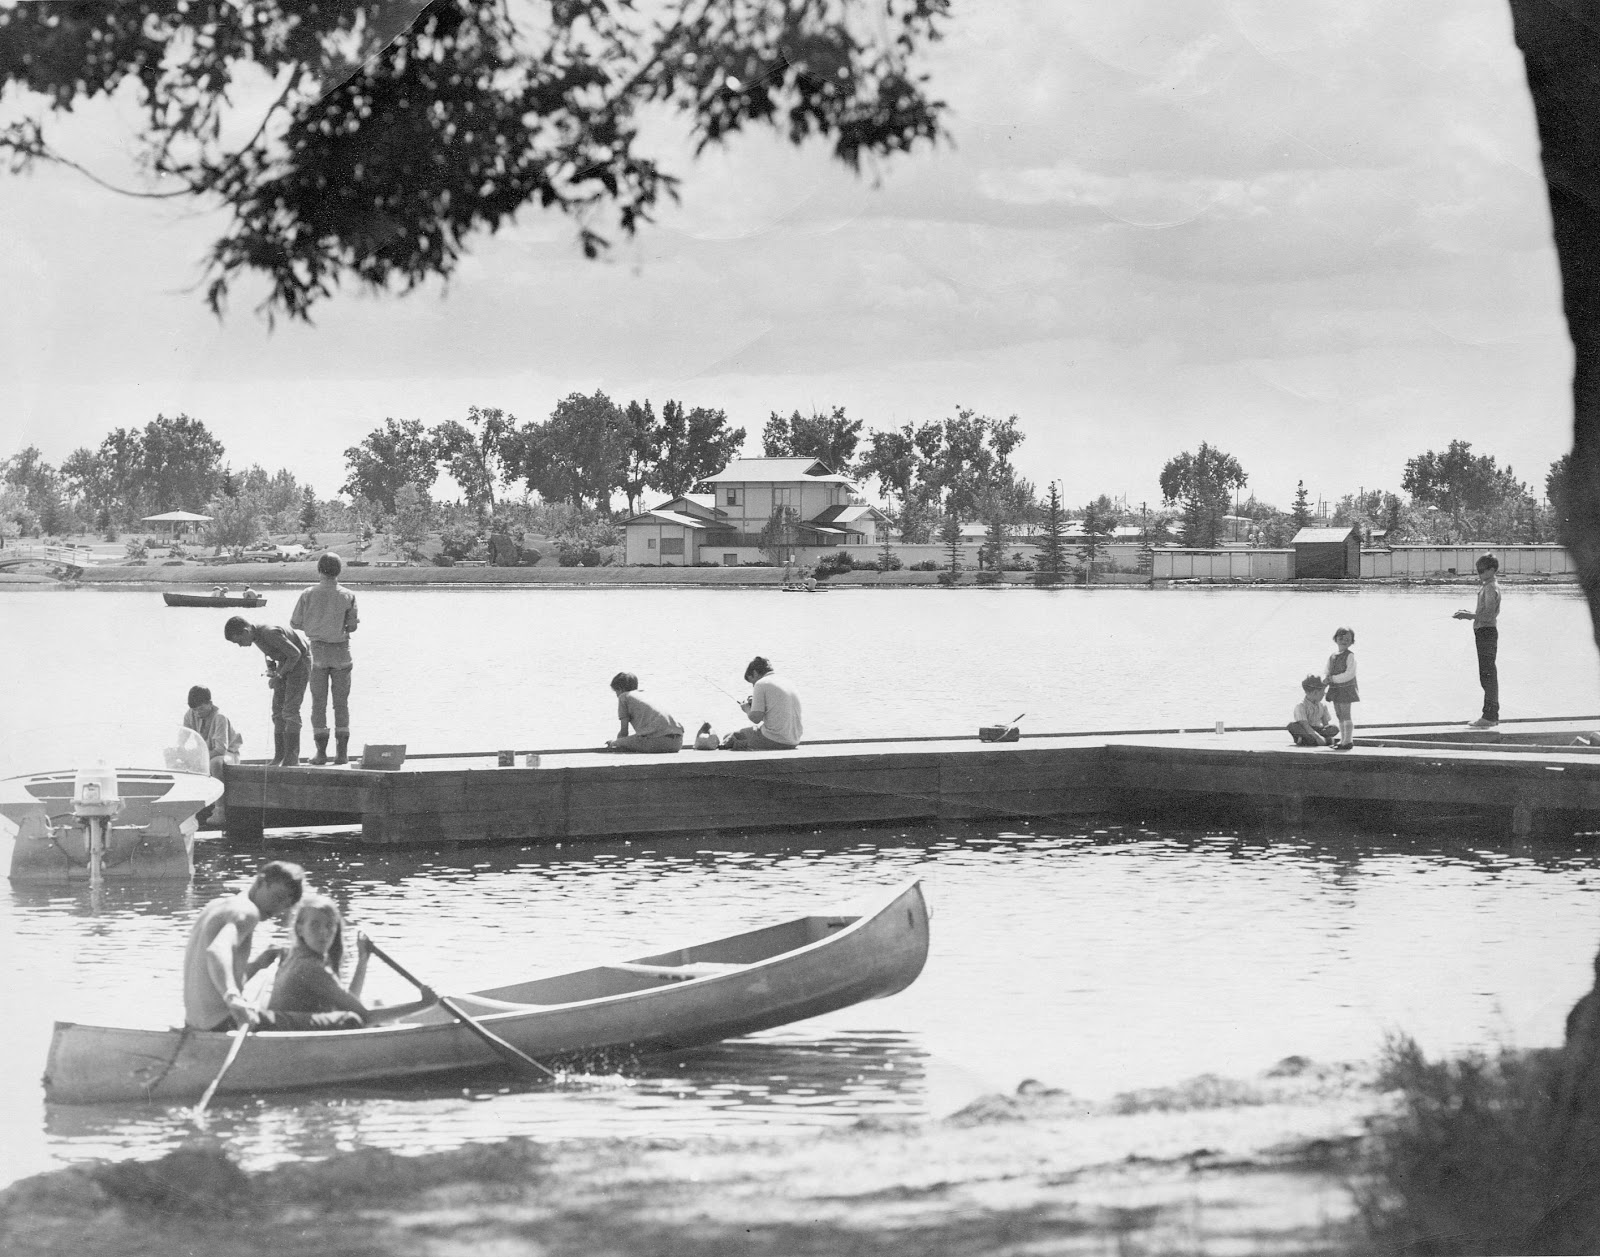  Fishing and canoeing on Henderson Lake, 1970. Galt Archives 19760219018 